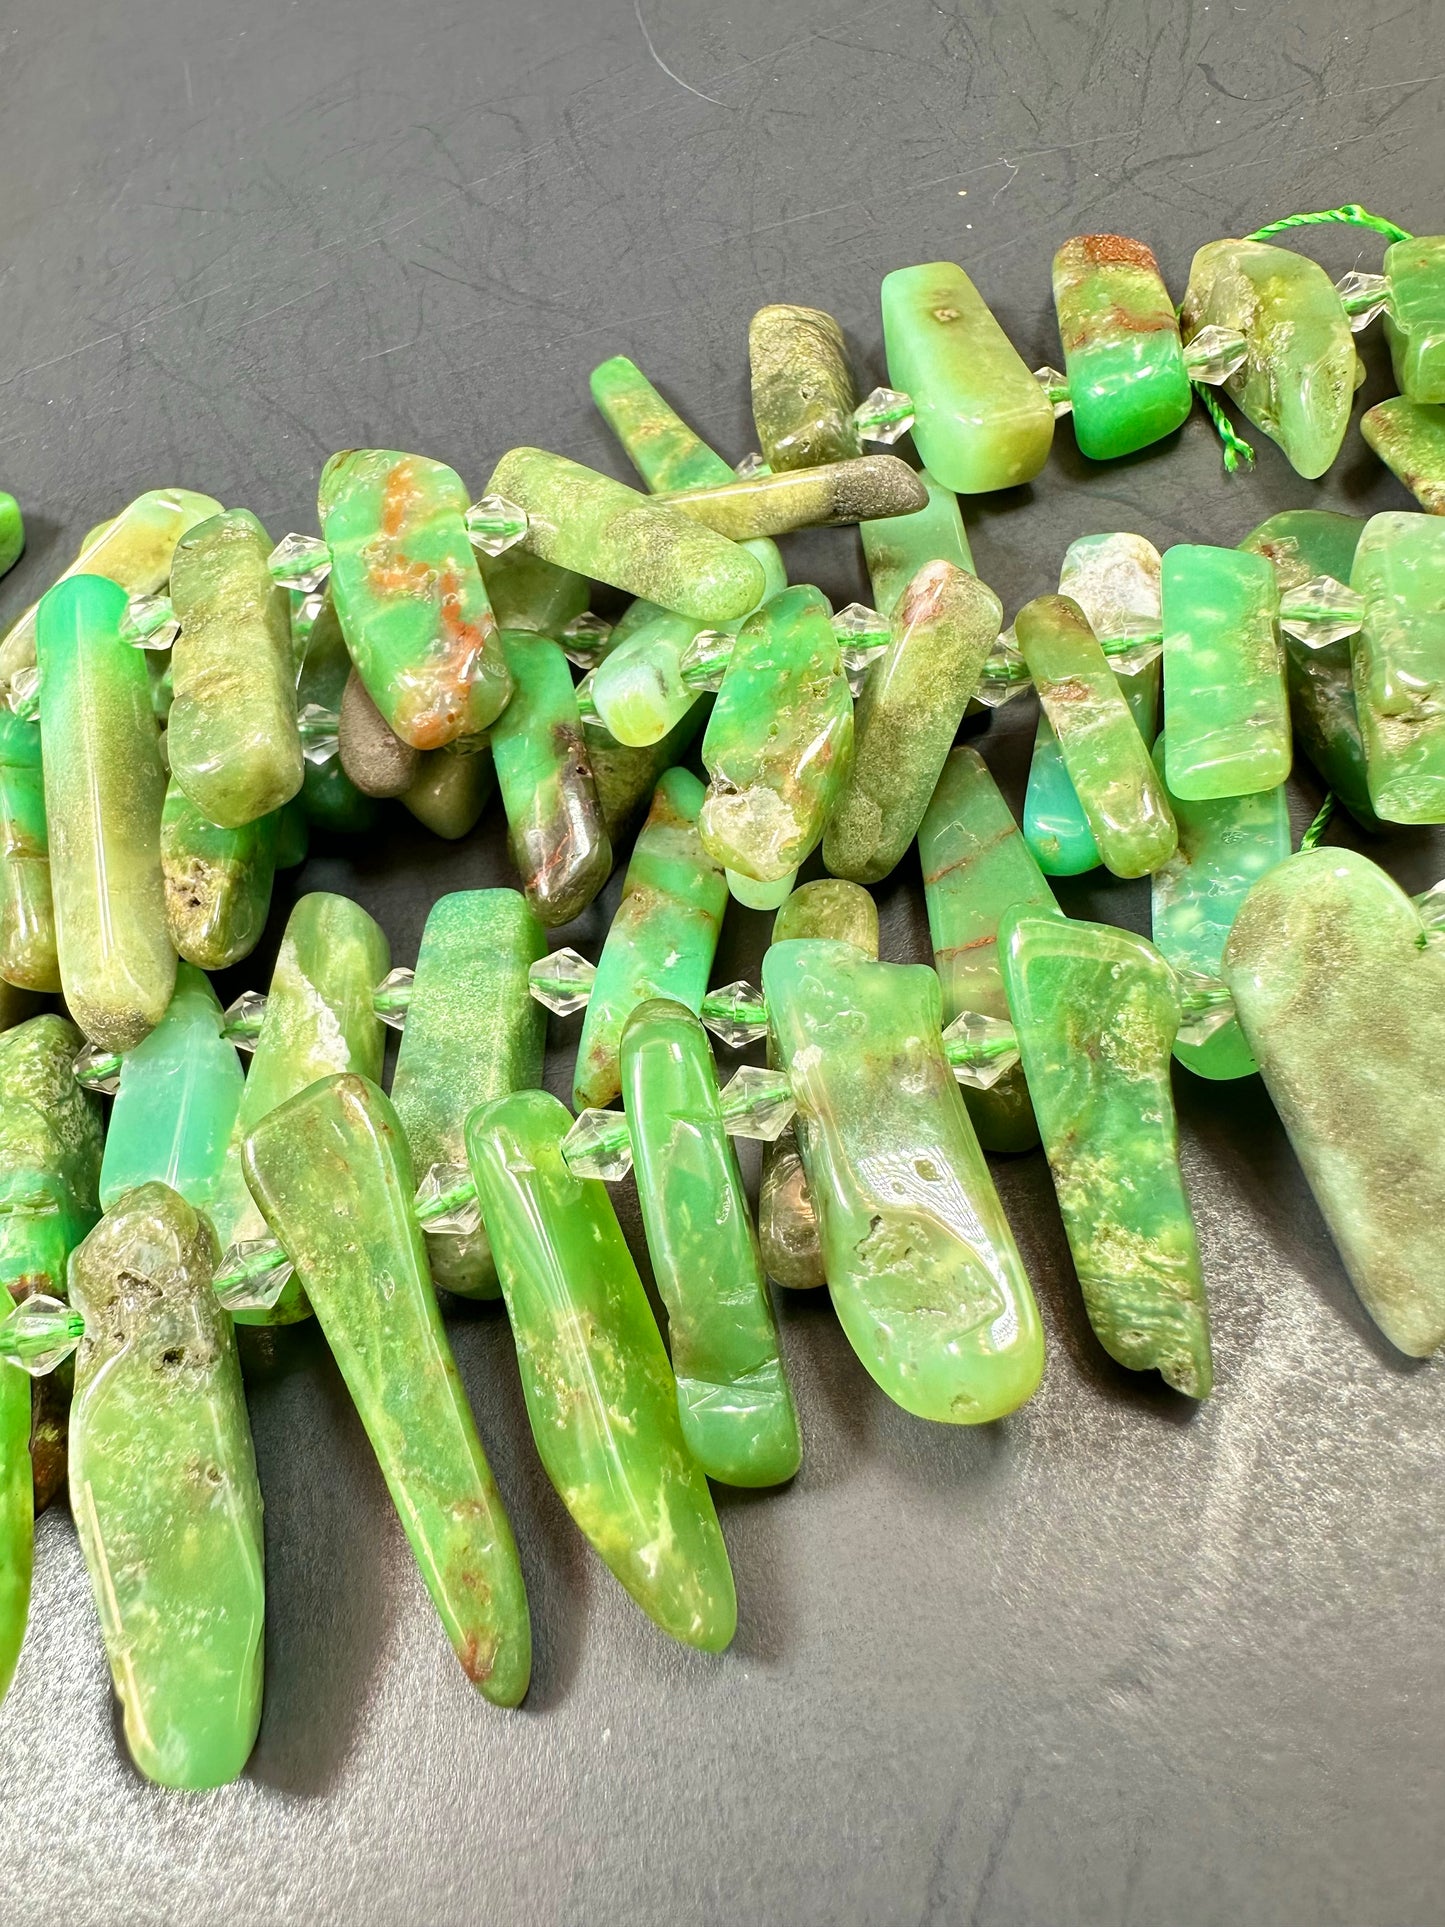 AAA NATURAL Chrysoprase Gemstone Bead, Graduated Stick Shape Bead. Gorgeous Jade Green Color Beads Excellent Quality Full Strand 15.5"